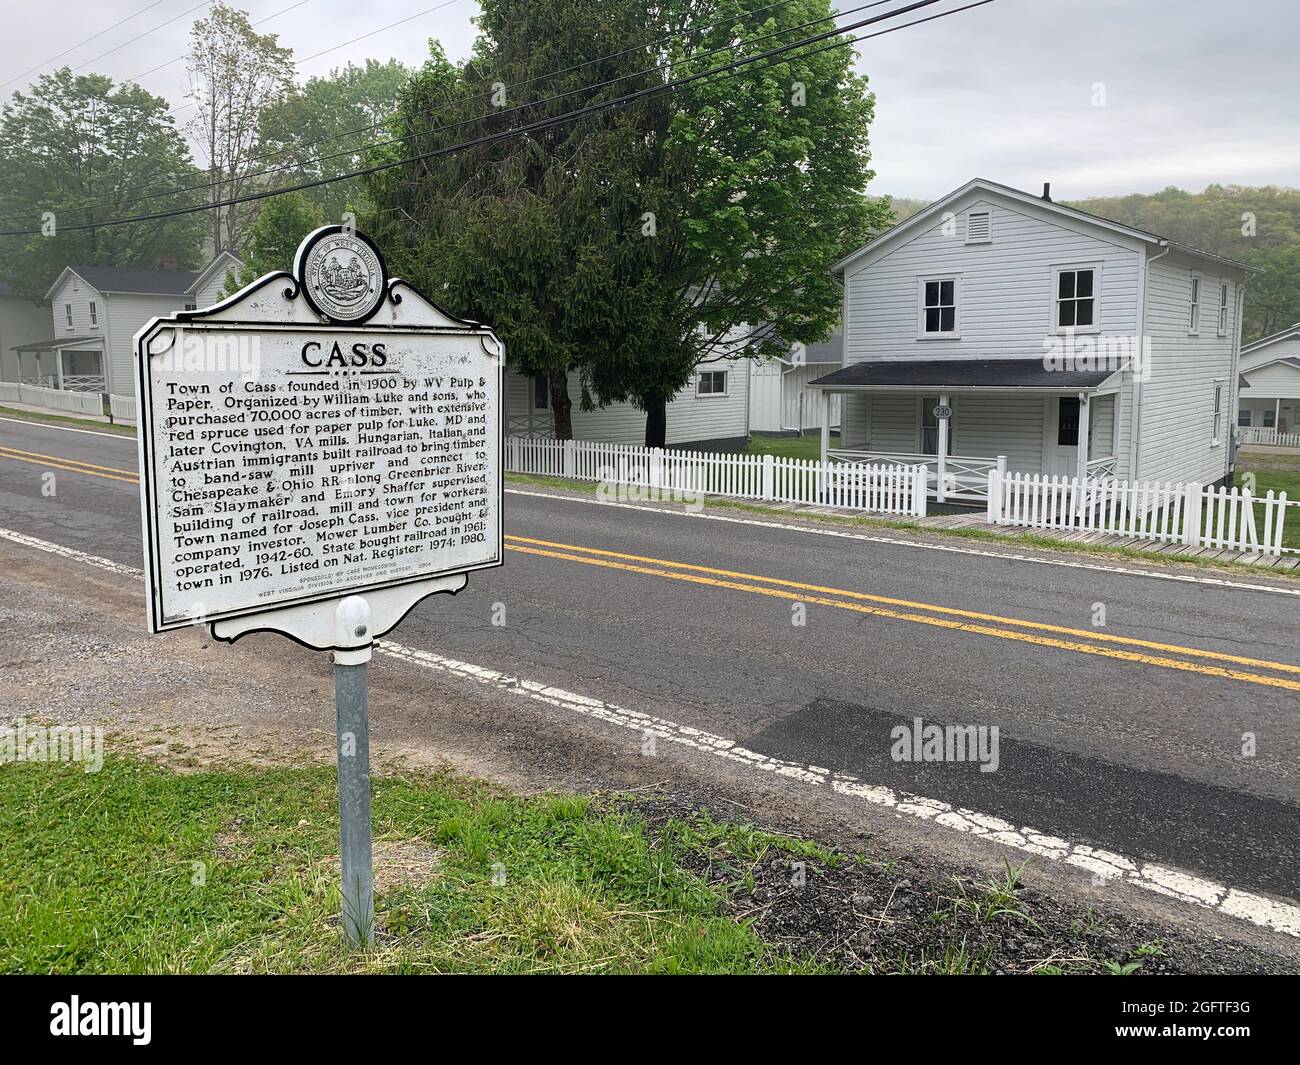 Cass, West Virginia, an Historic Early Twentieth Century Lumber Paper Mill Town. Stock Photo